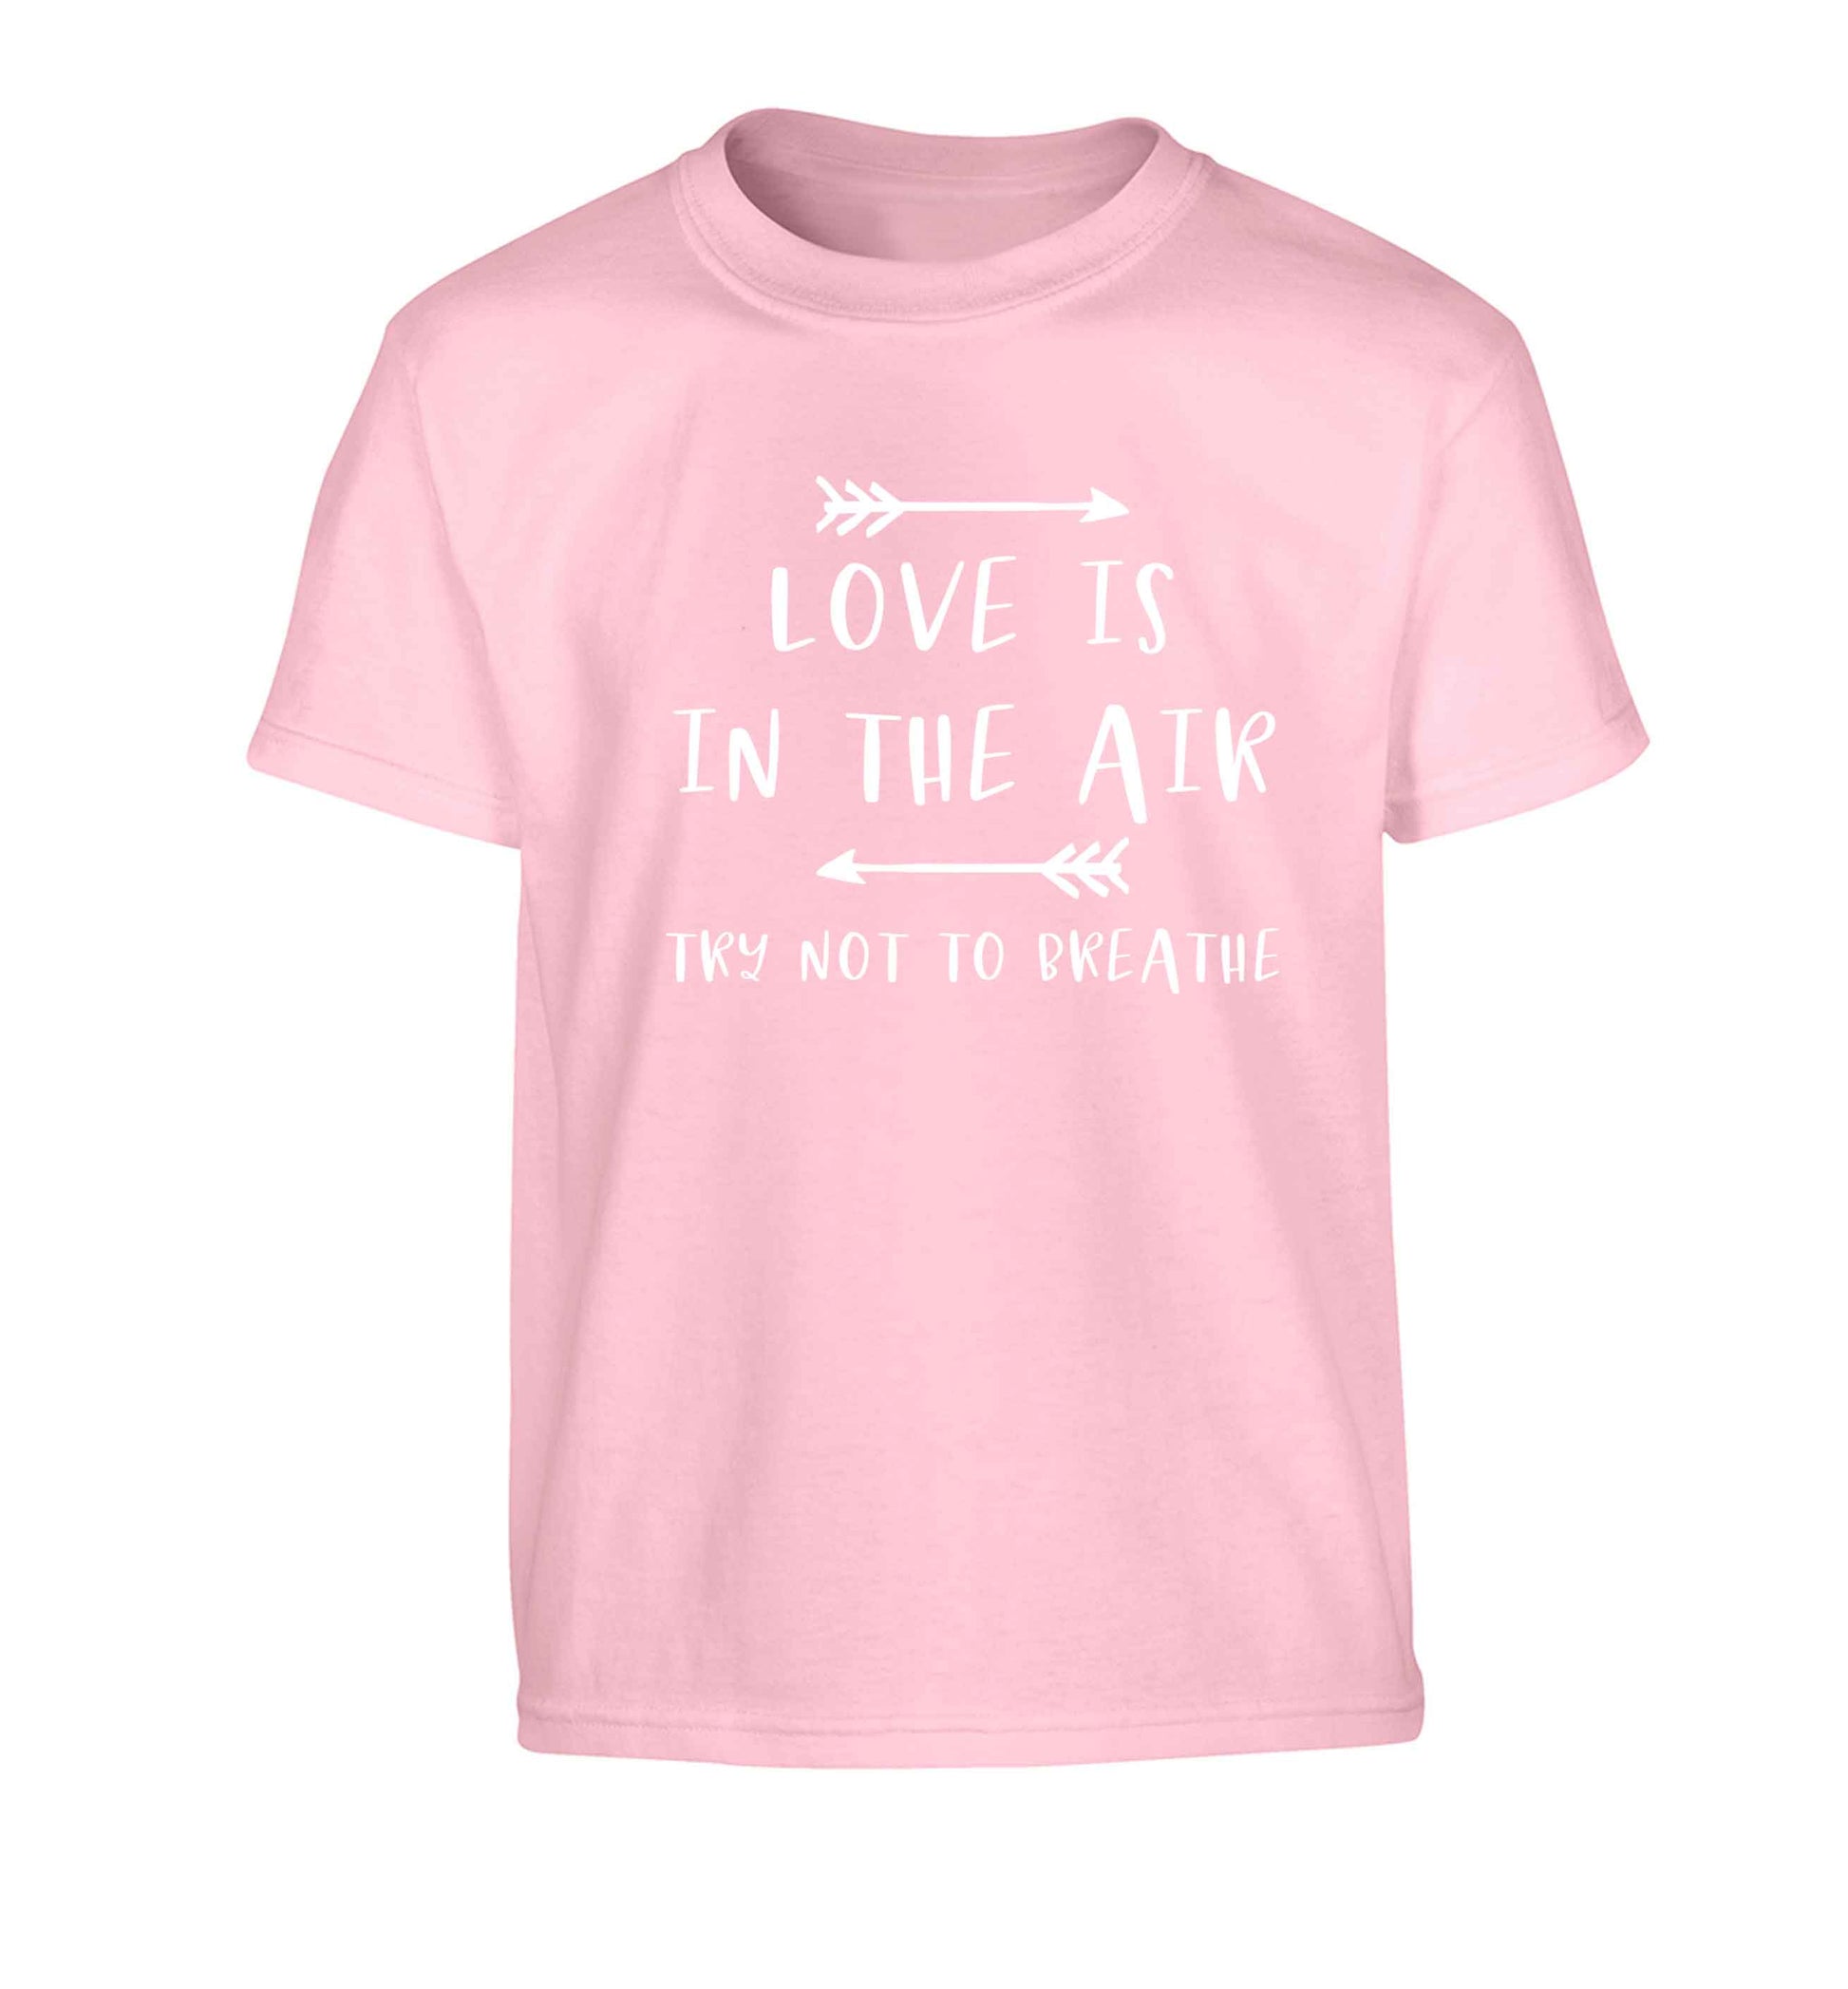 Love is in the air try not to breathe Children's light pink Tshirt 12-13 Years